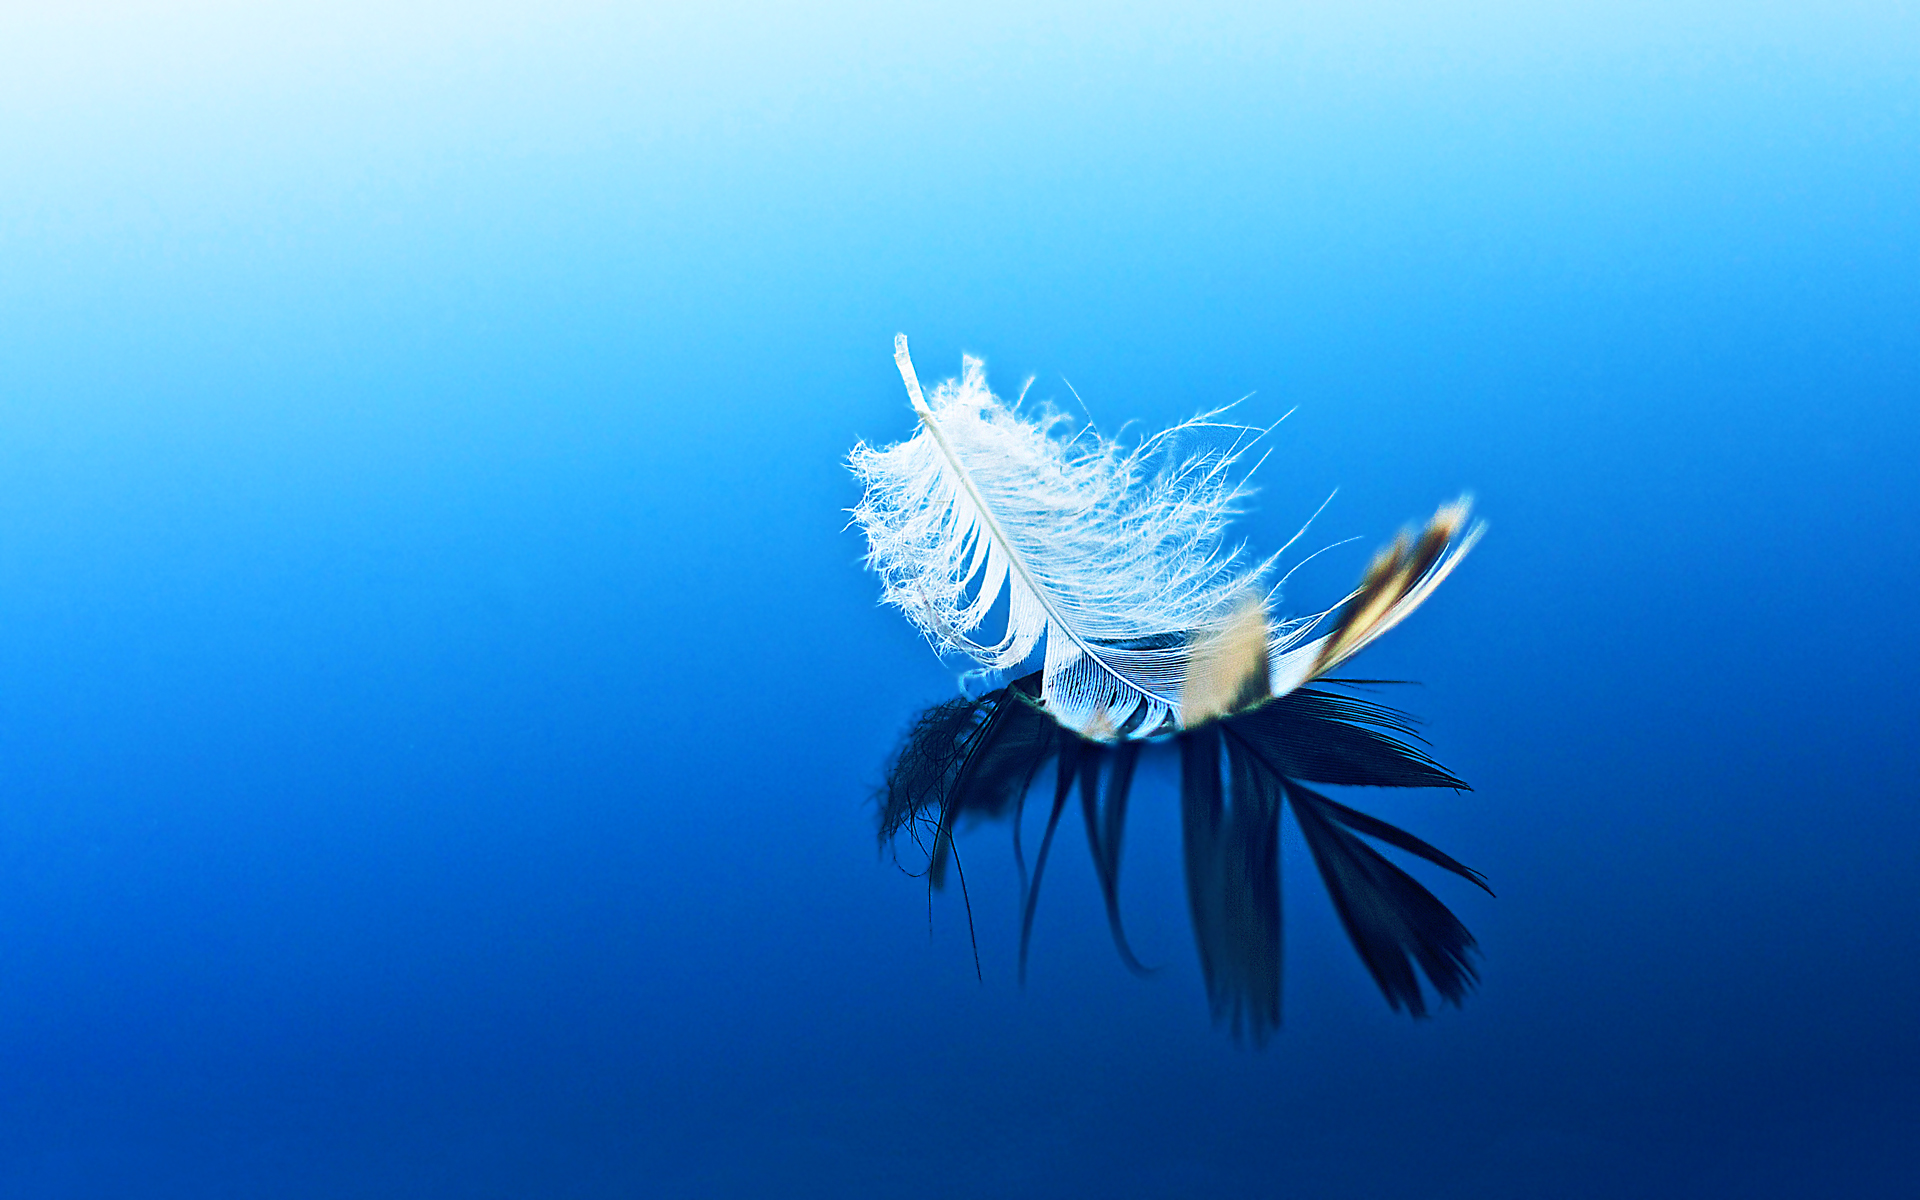 A white feather floats on the surface of the water